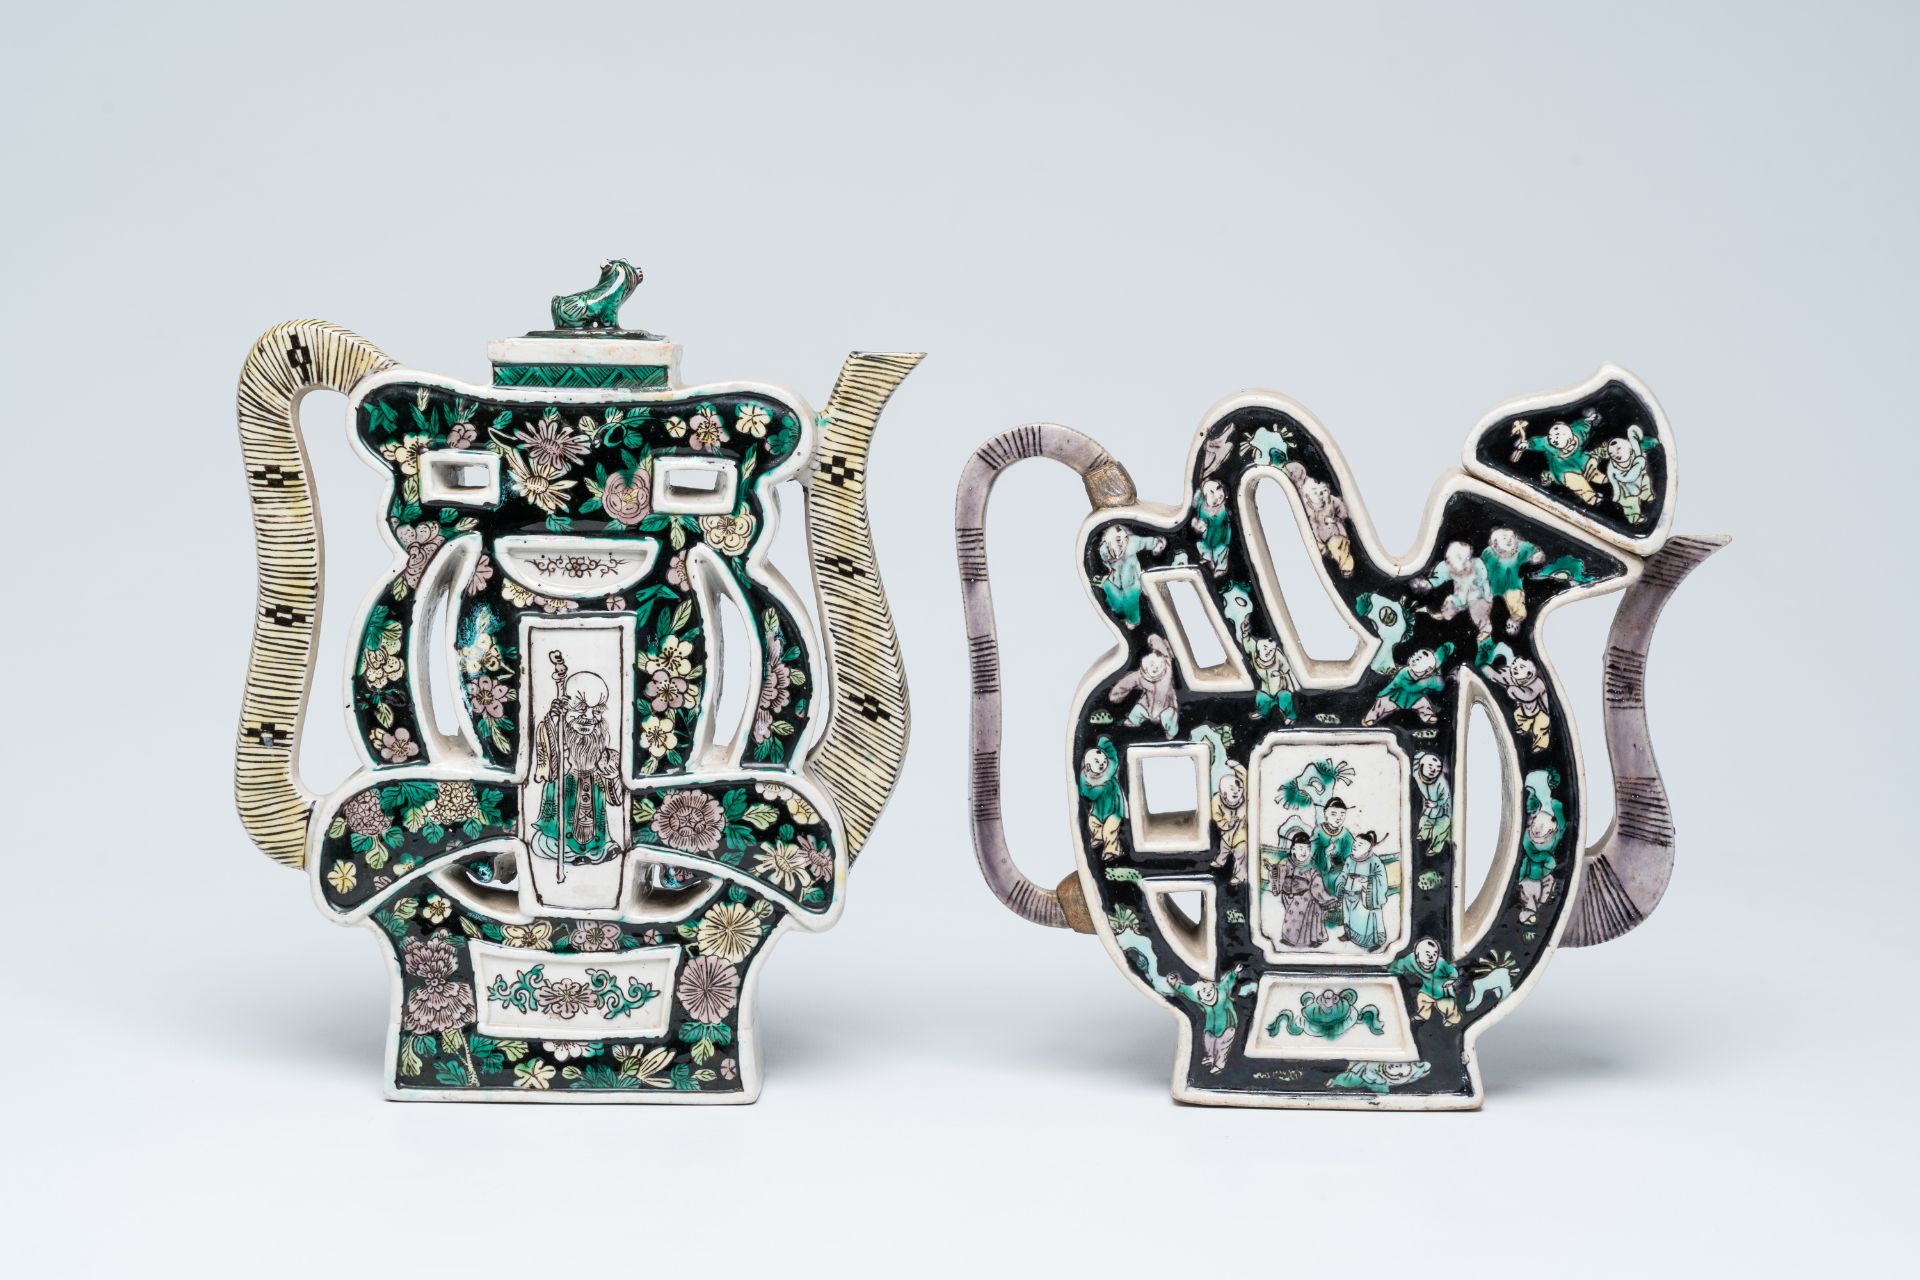 Two Chinese famille noire biscuit 'puzzle' teapots and covers with figures in a landscape and floral - Image 5 of 8